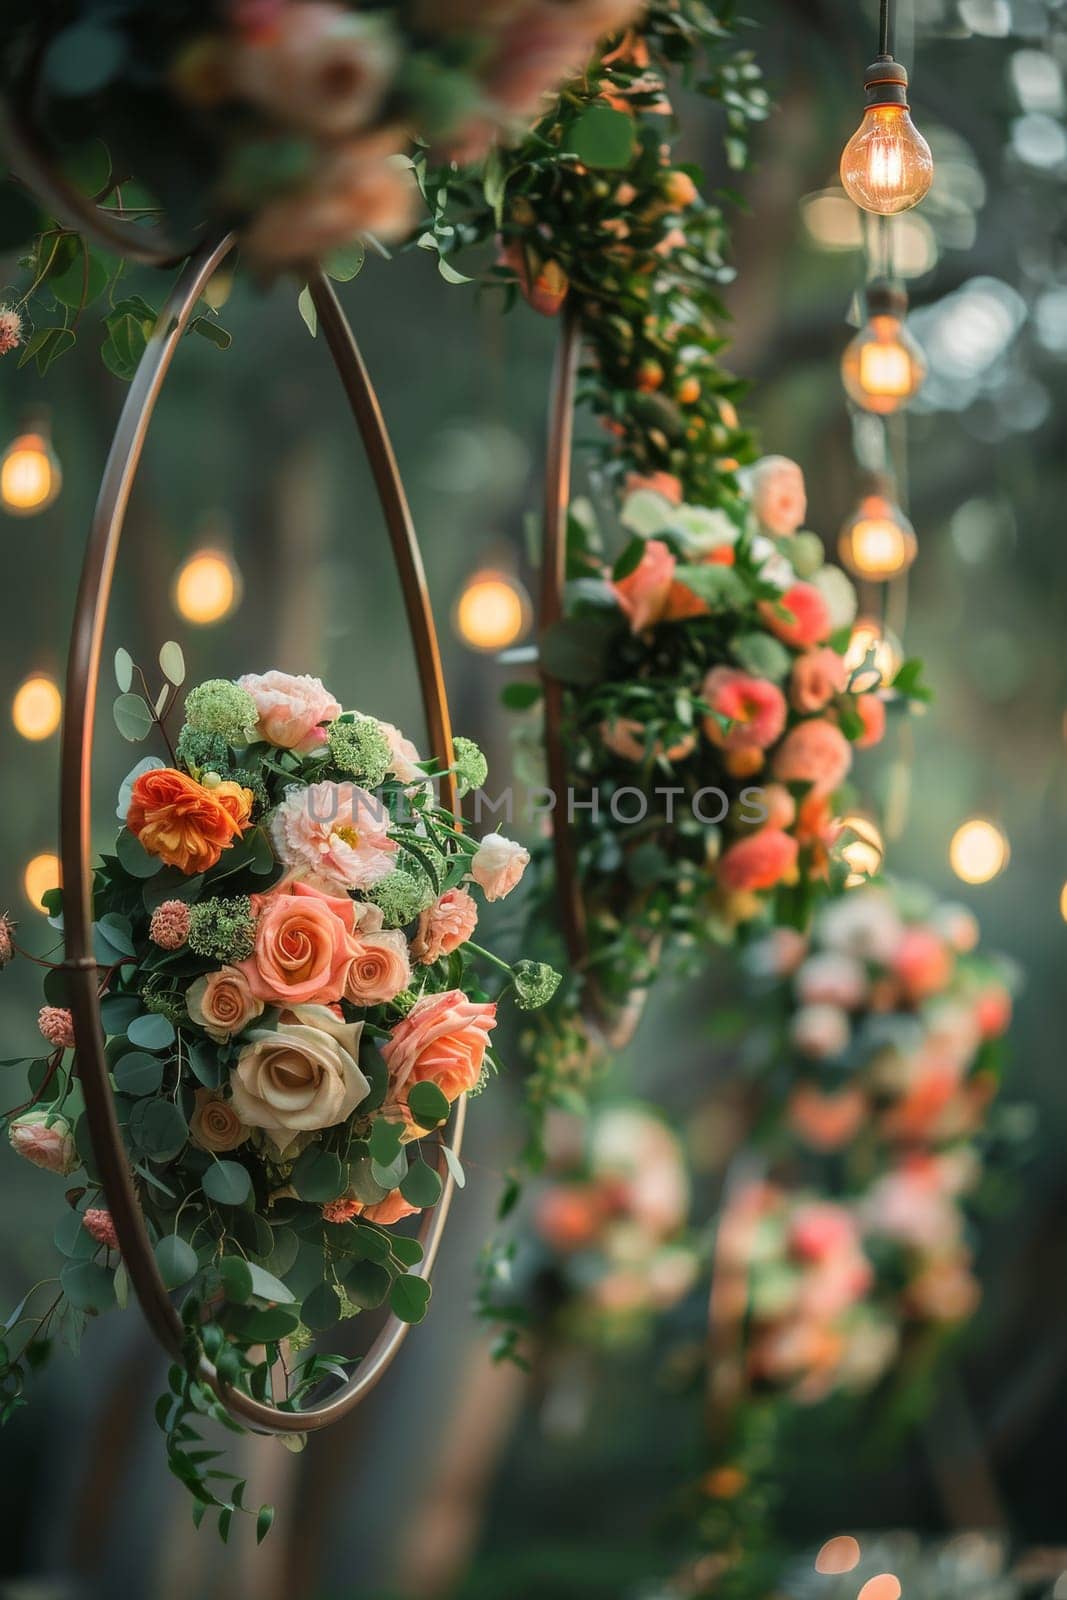 A series of flower arrangements are suspended from the ceiling, creating a warm and inviting atmosphere. The flowers are of various colors and sizes, and they are arranged in a circular pattern